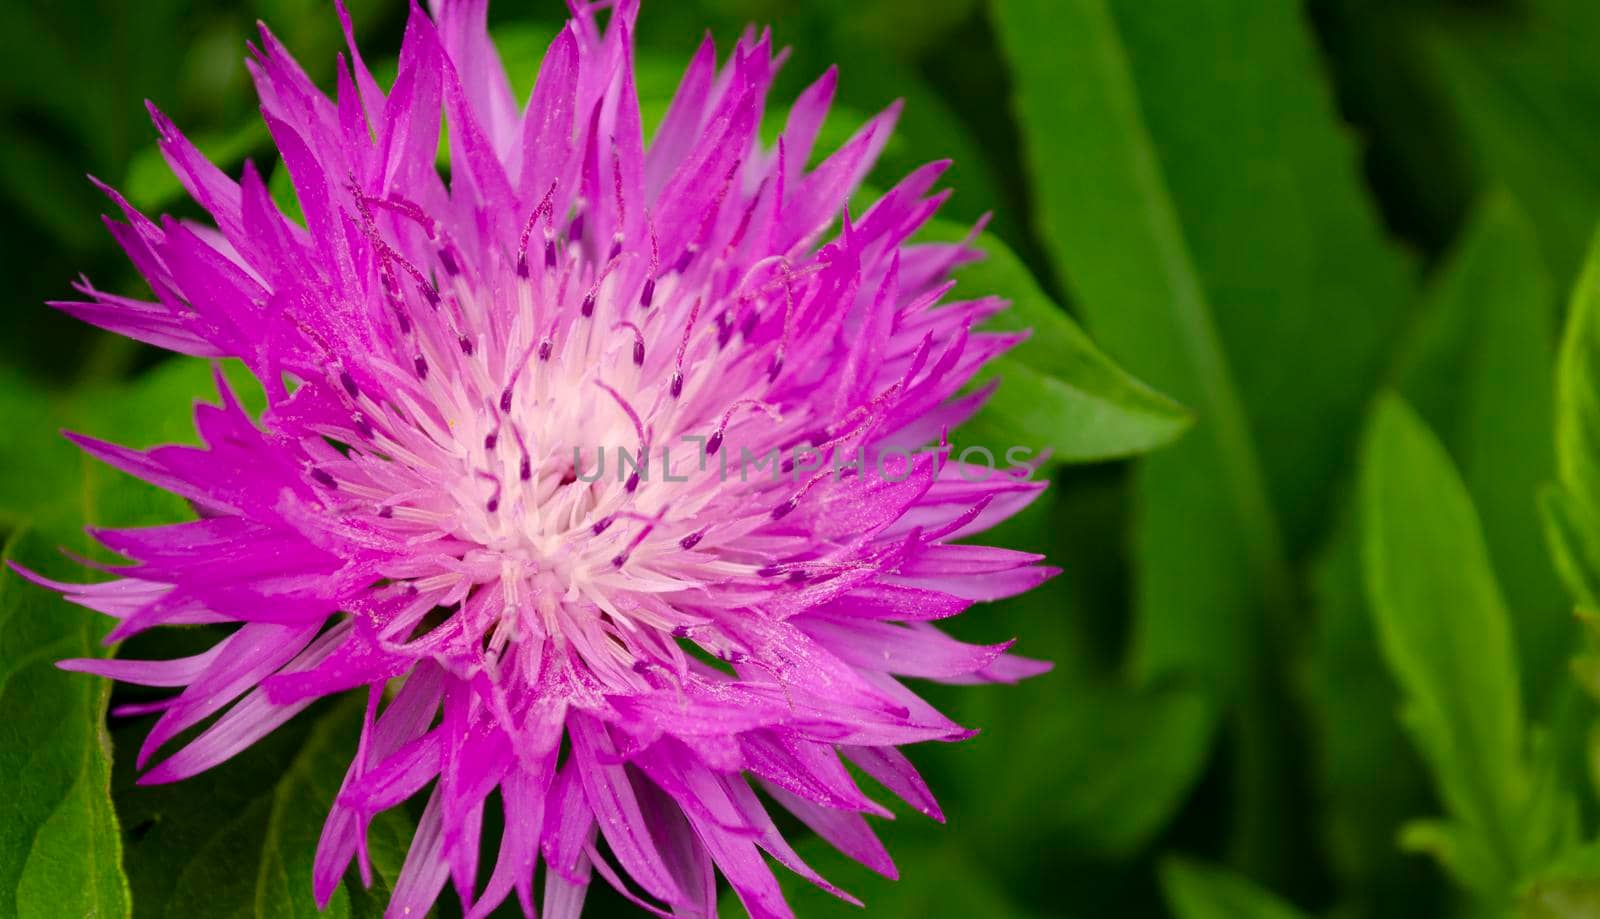 Purple and white Stokes Aster flower shot close-up on a blured background of greenery by mtx